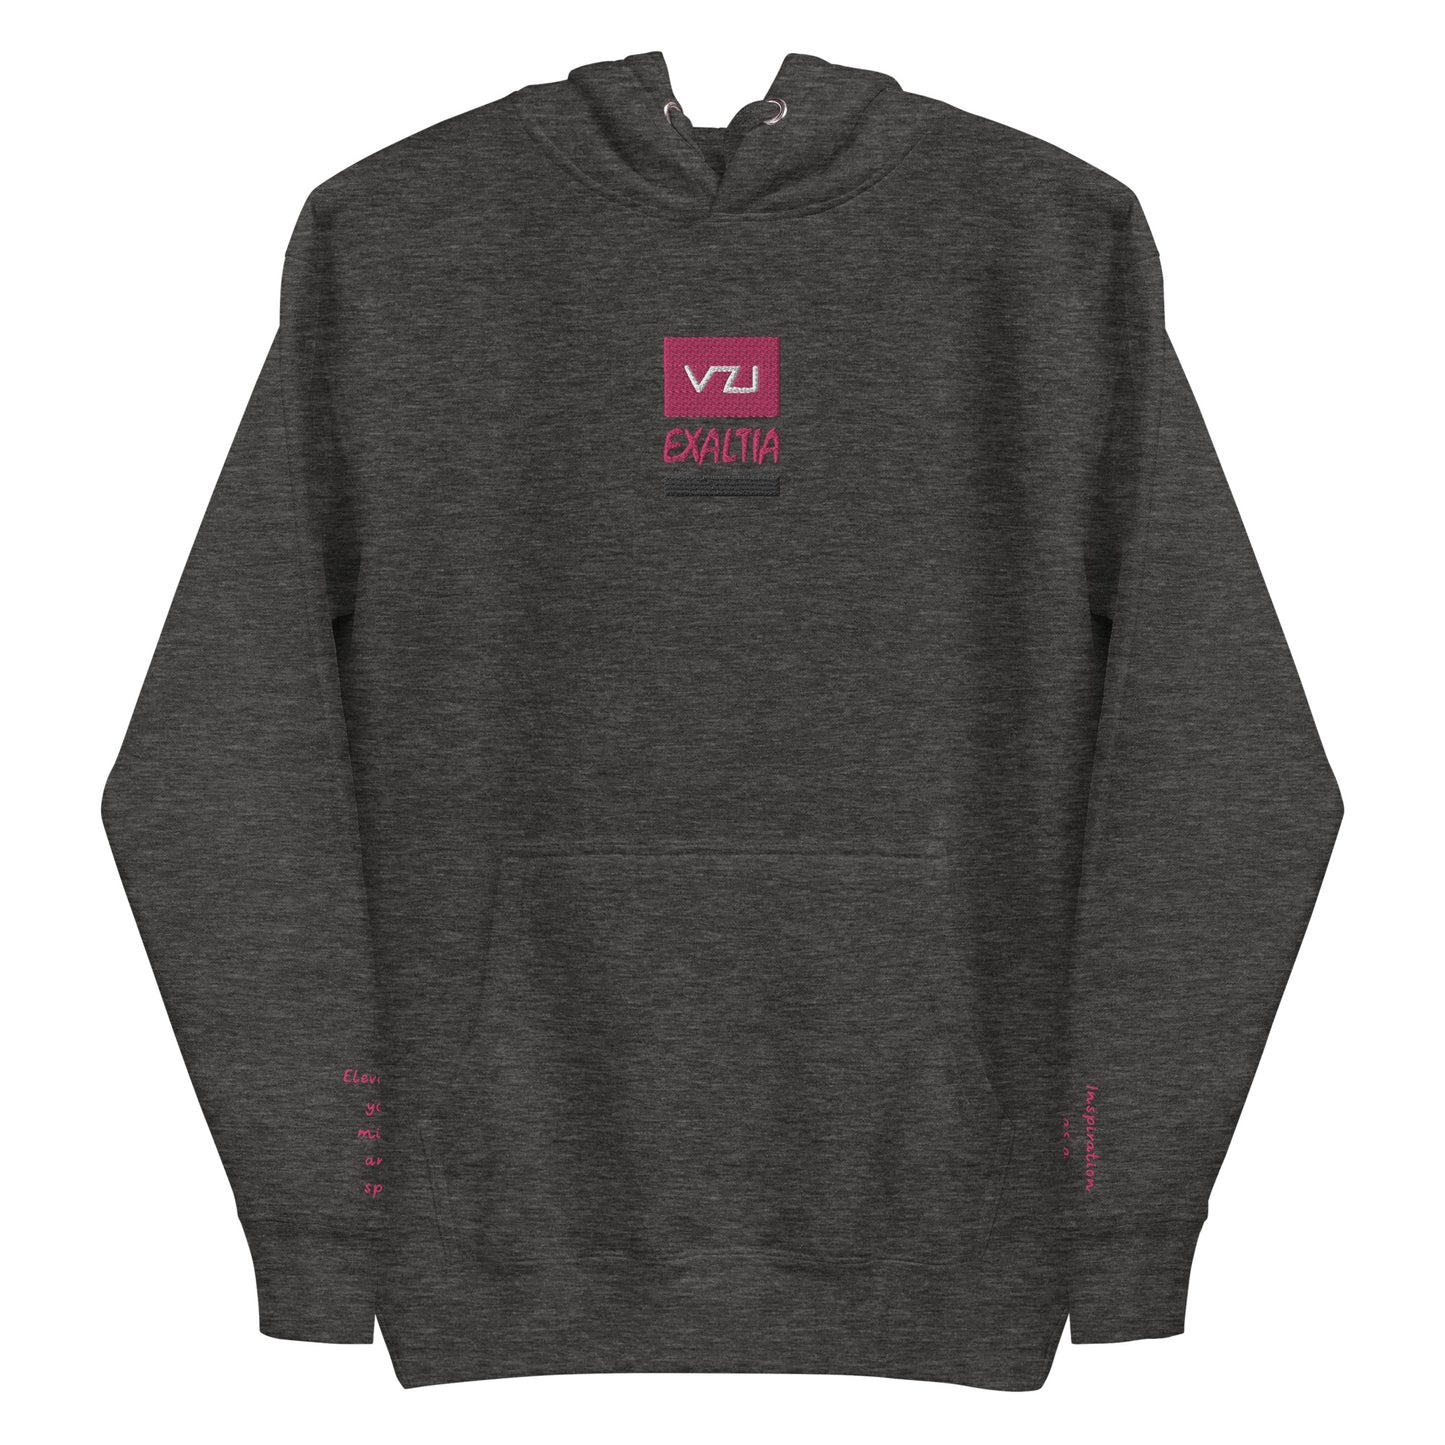 VZI Exaltia Hoodie - Inspiration as driving force writing on left hand